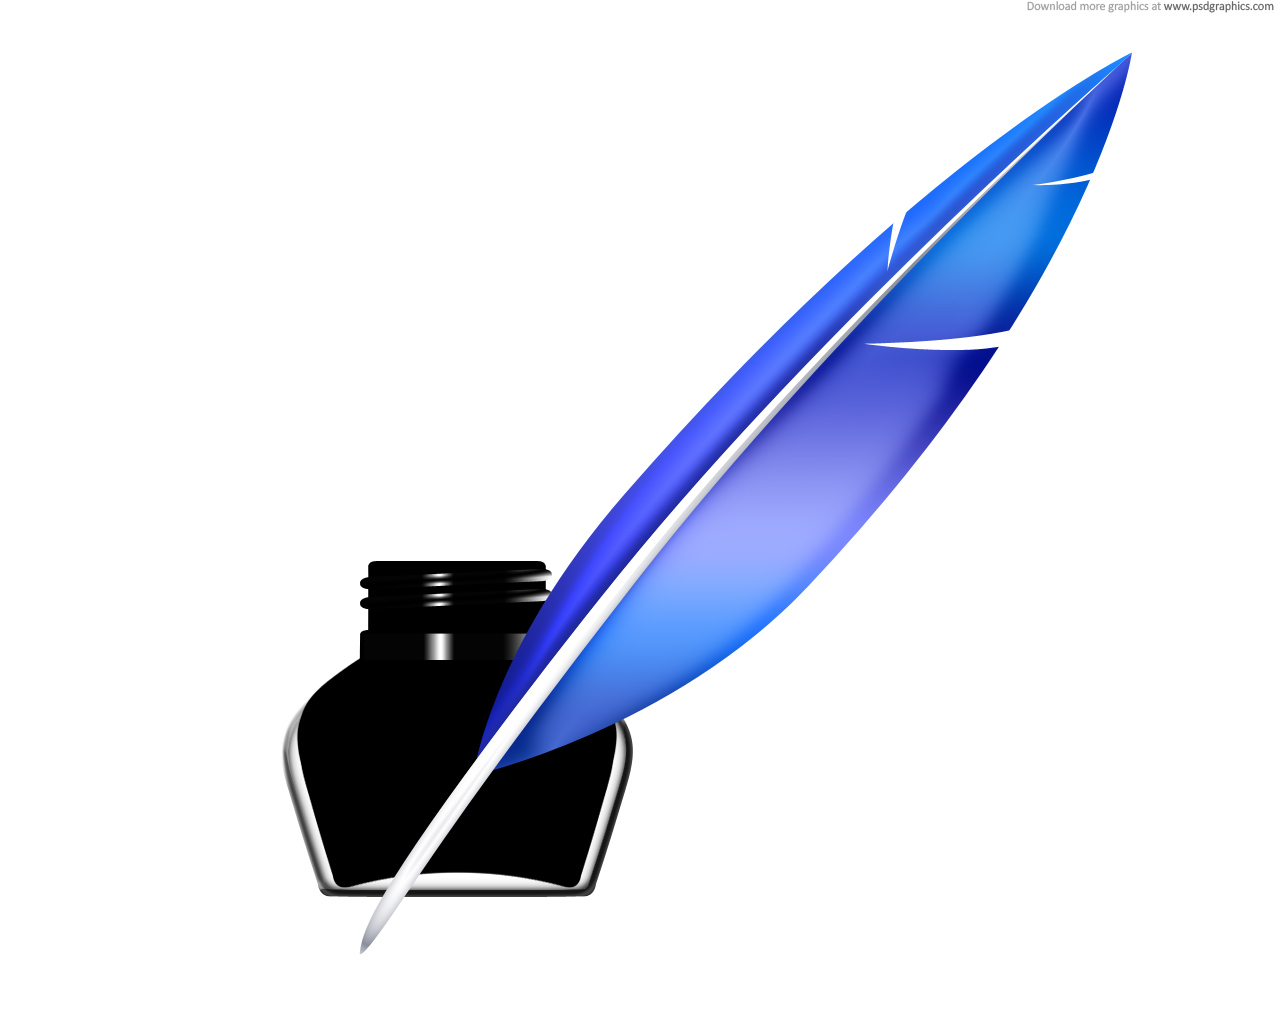 Quill pen and inkwell icon (PSD) | PSDGraphics